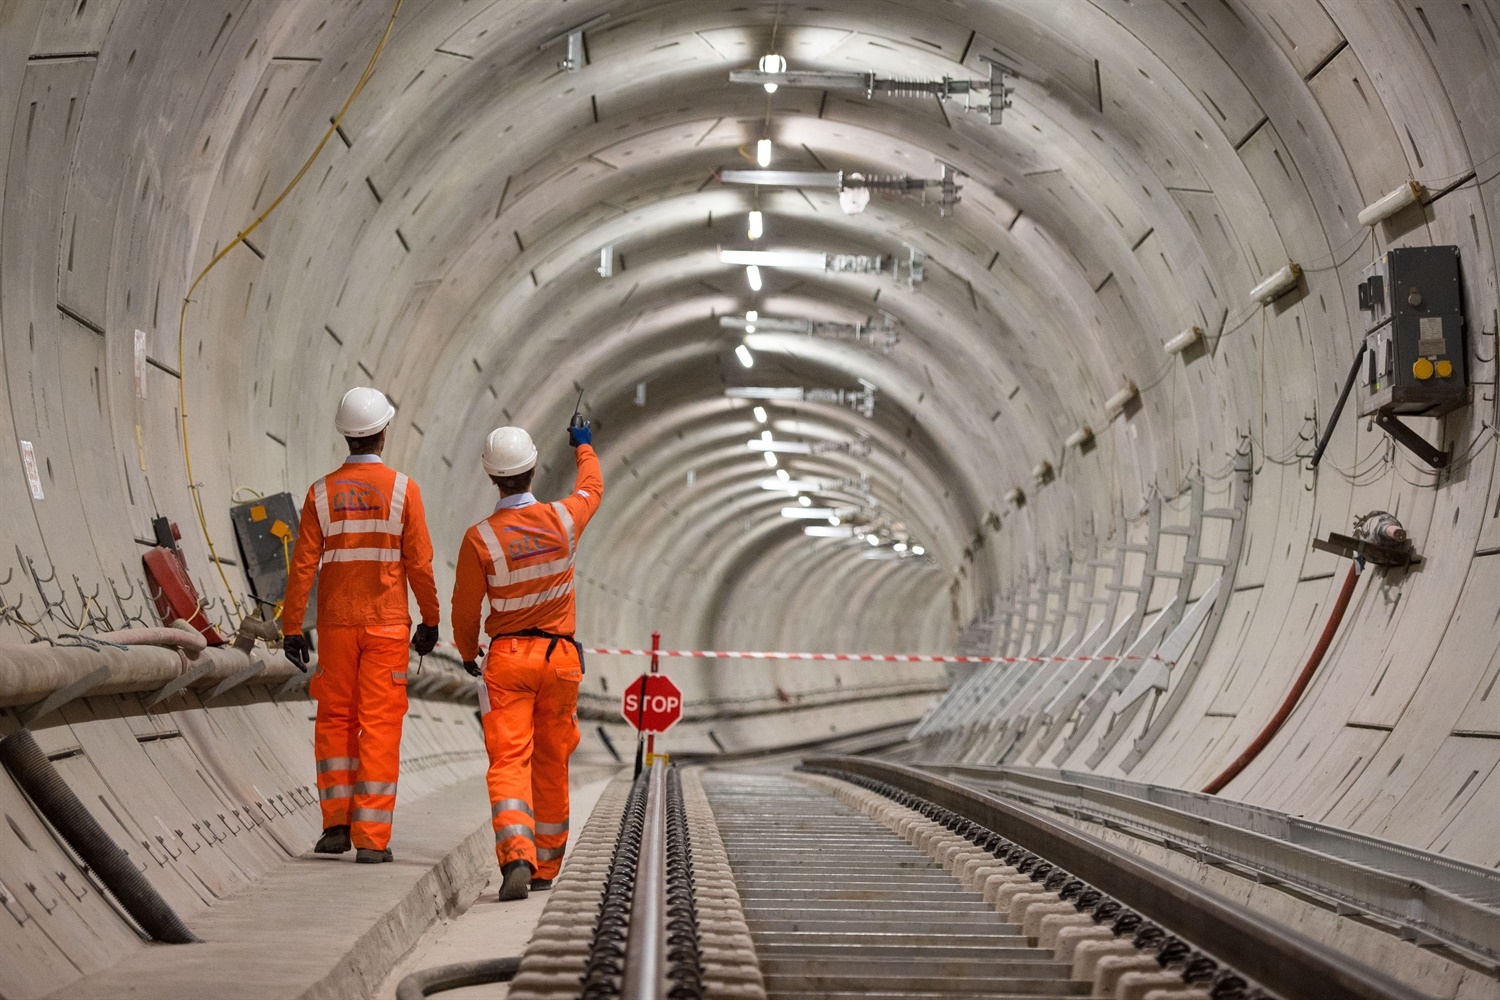 Rail industry urges policymakers to save Crossrail 2 in wake of major Crossrail delays 